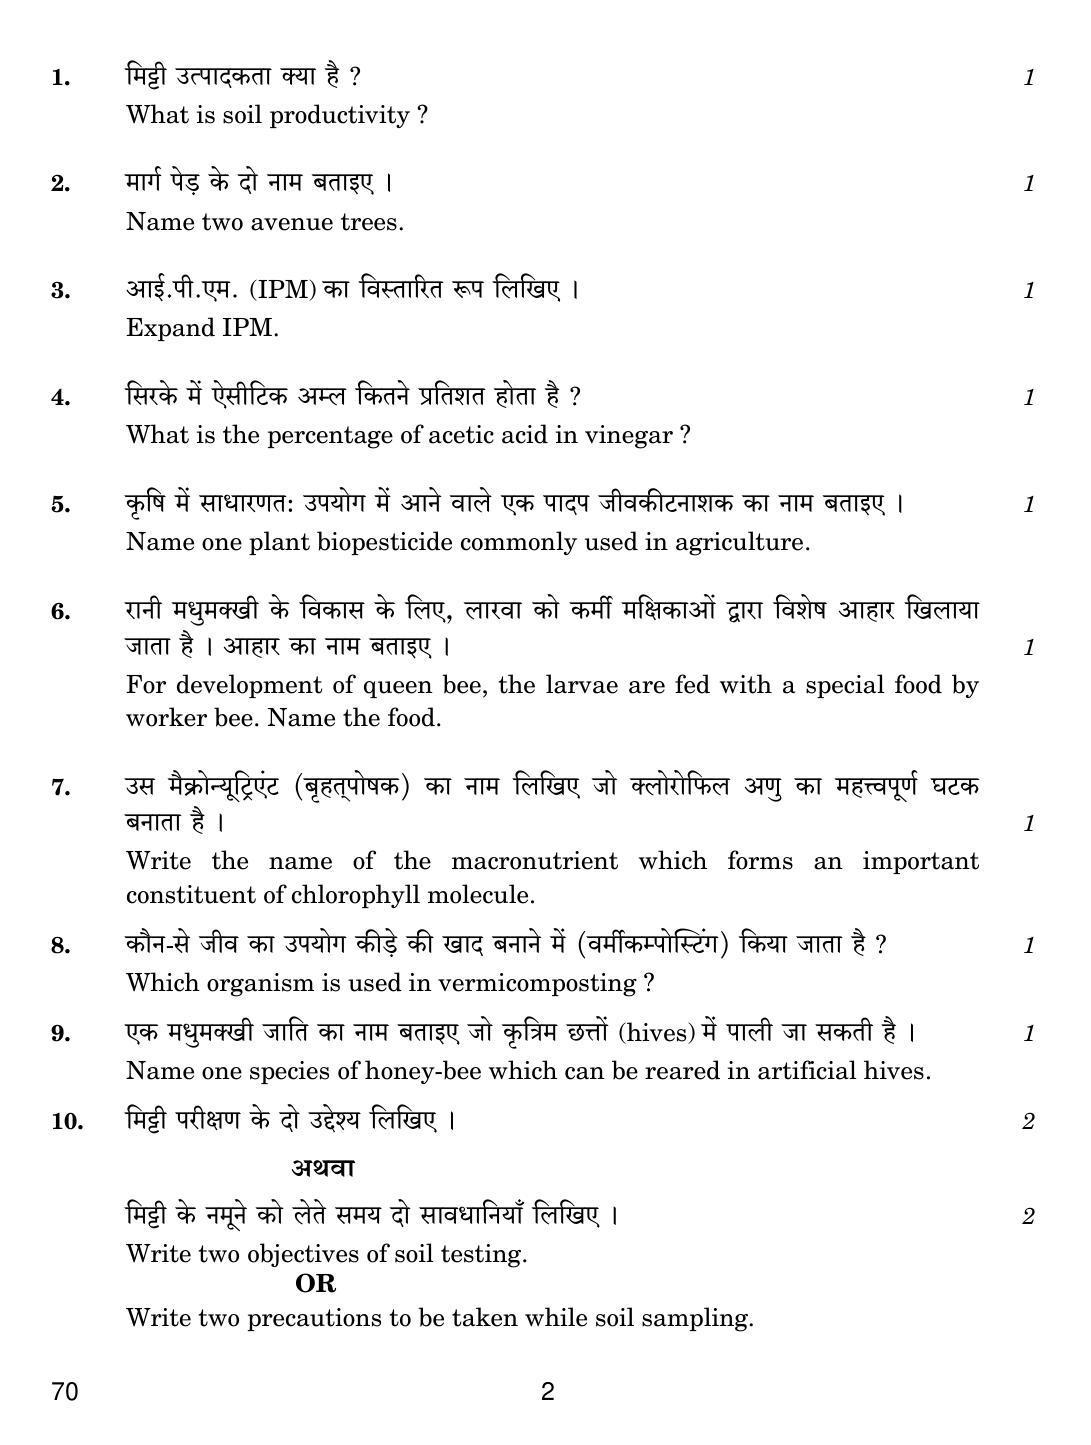 CBSE Class 12 70 AGRICULTURE 2019 Compartment Question Paper - Page 2